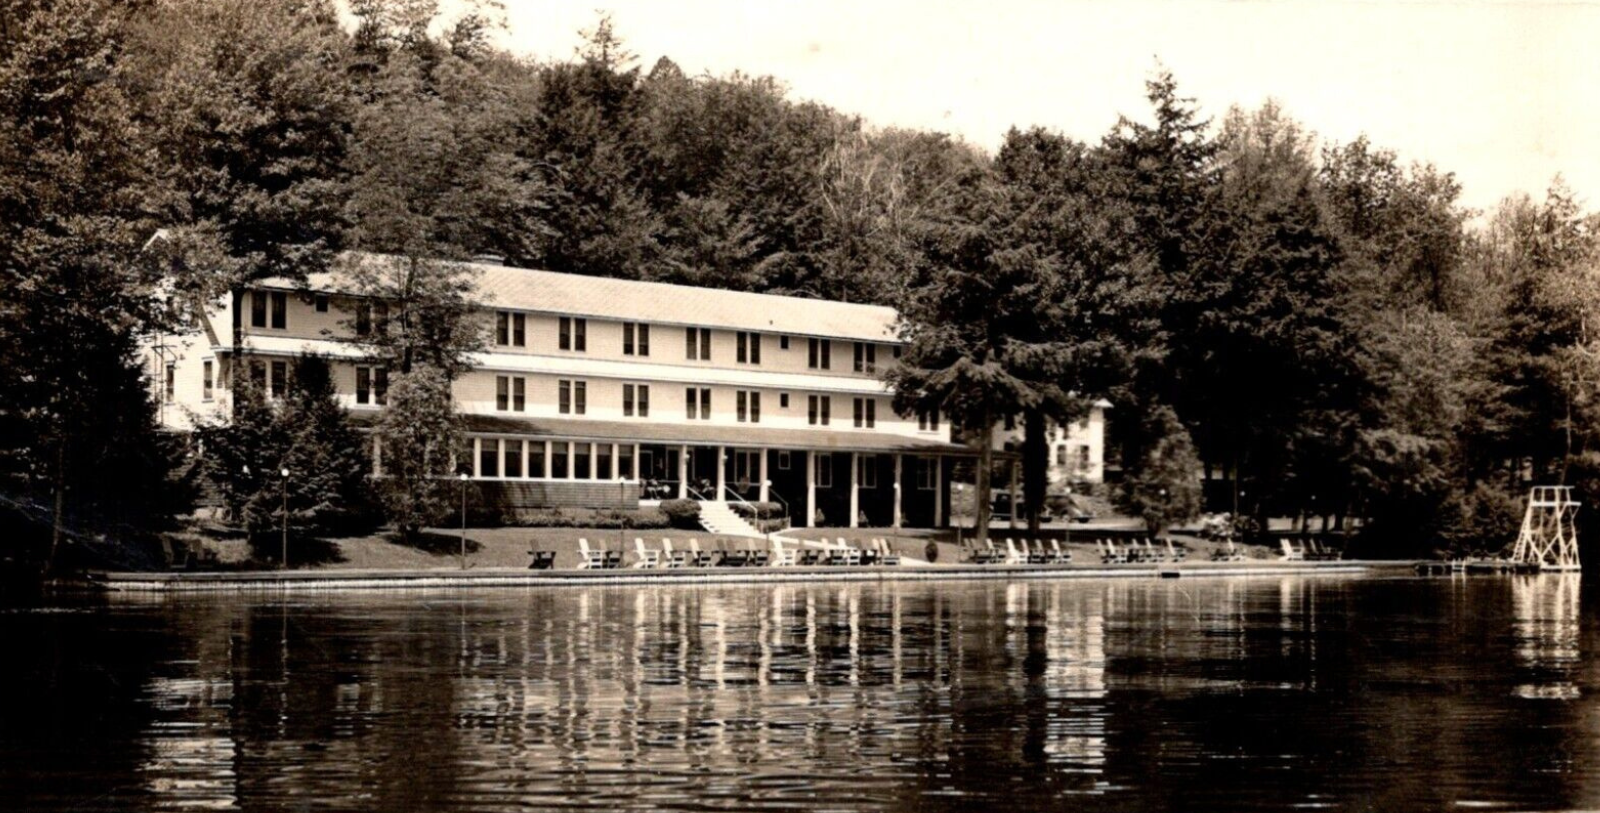 Historical image of Oquaga Lake and The Chestnut Inn, 1927, Member of Historic Hotels of America since 2023, in Deposit, New York